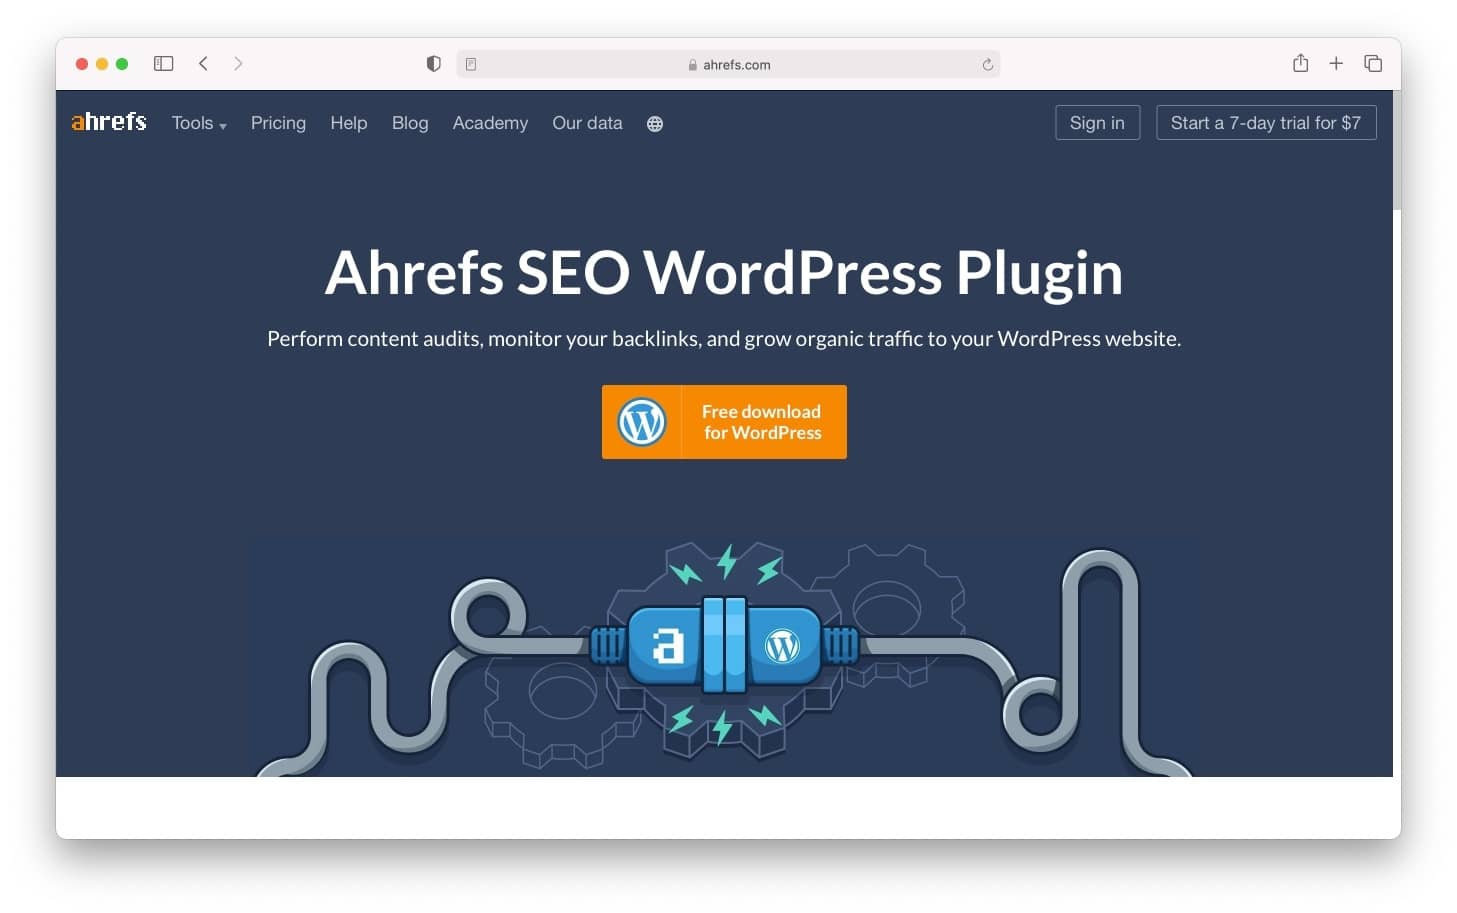 Ahrefs' stable of SEO tools includes a WordPress plugin